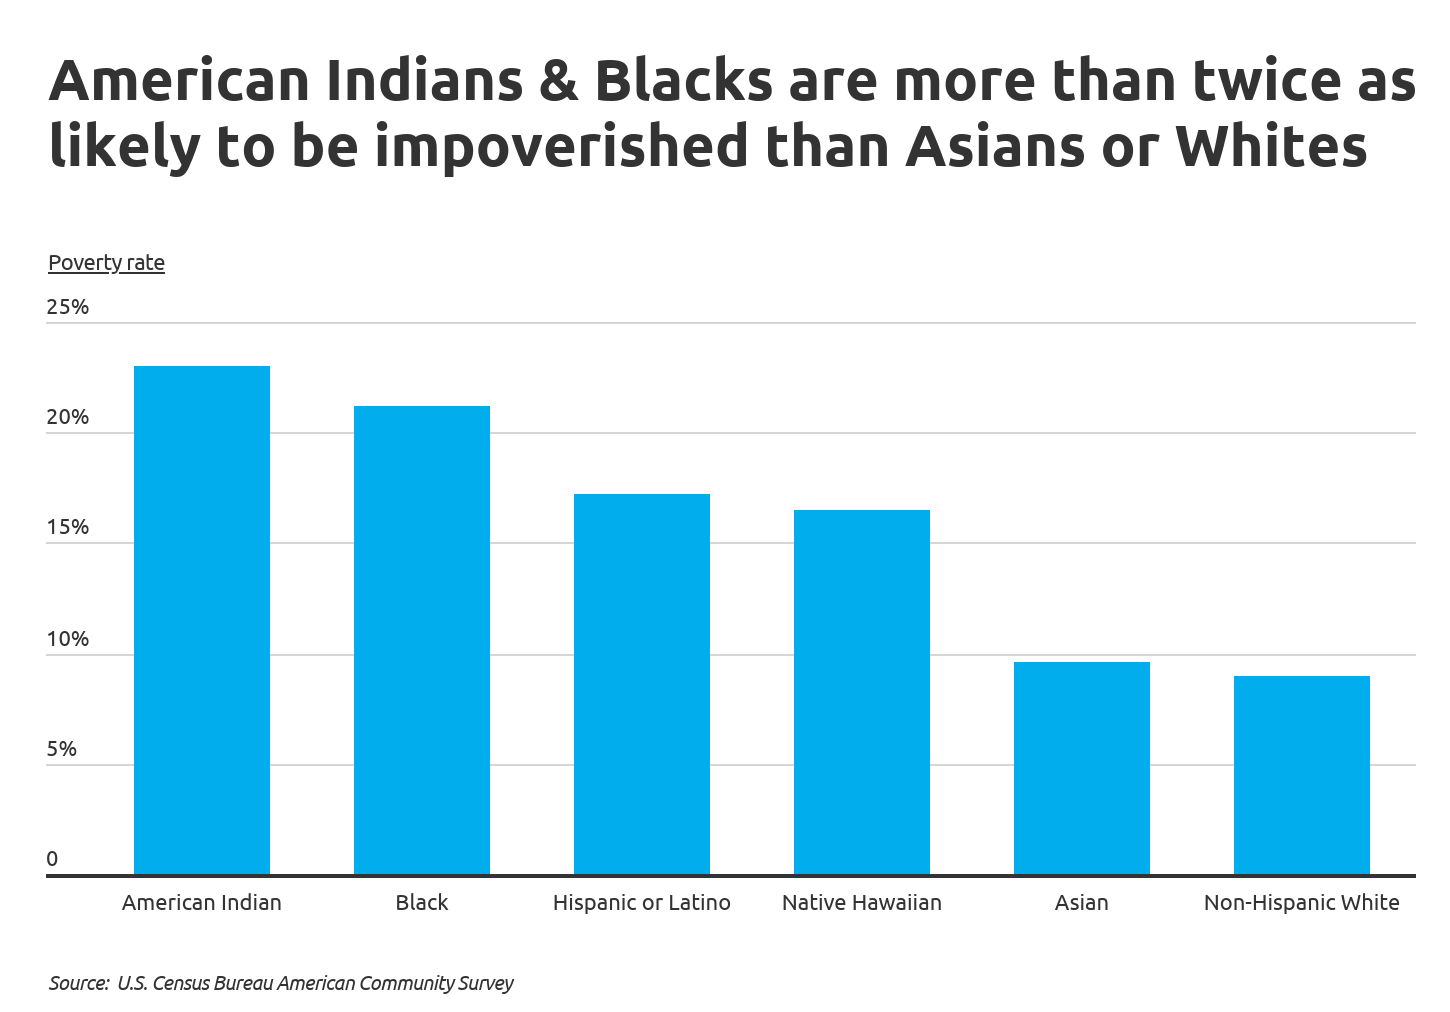 Blacks are twice as likely to be impoverished than whites